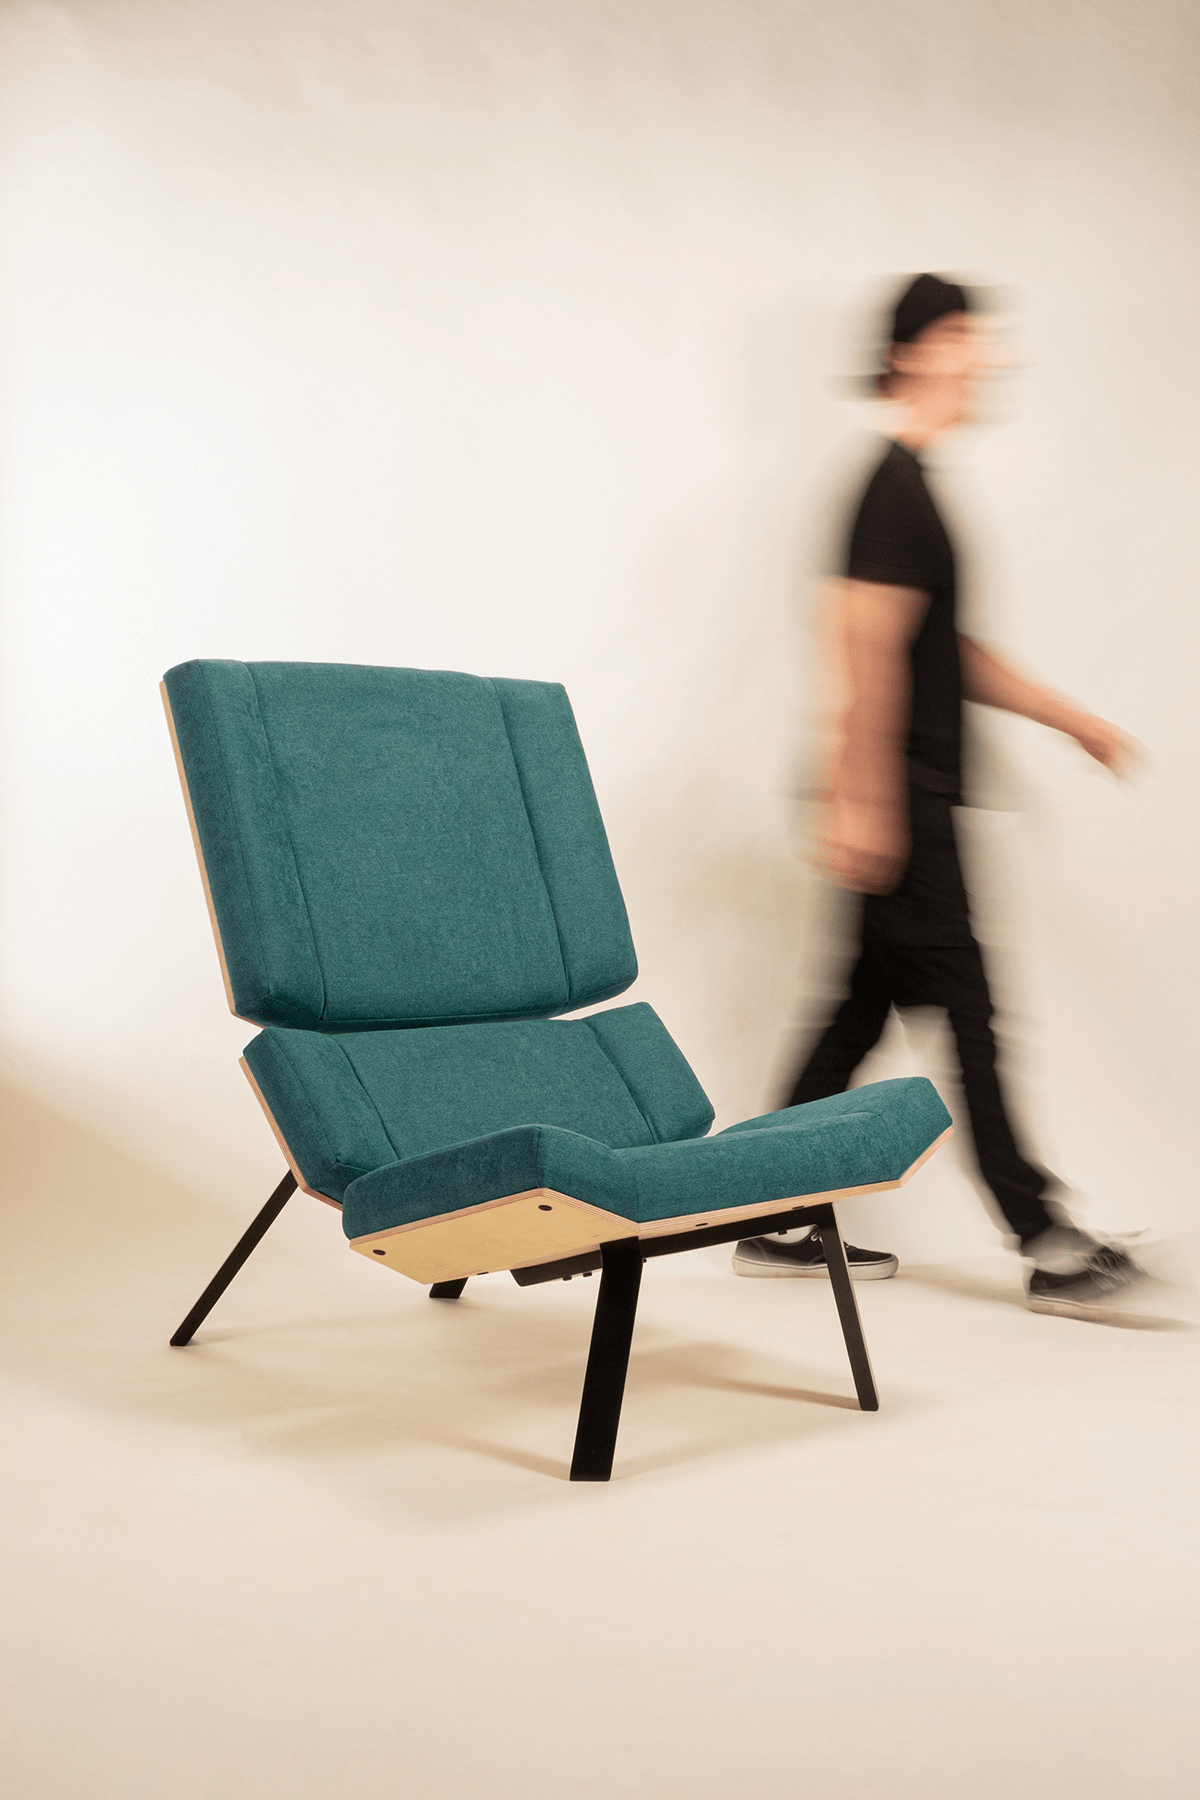 chair furniture furniture design  Lounge Chair product product design  upholstery